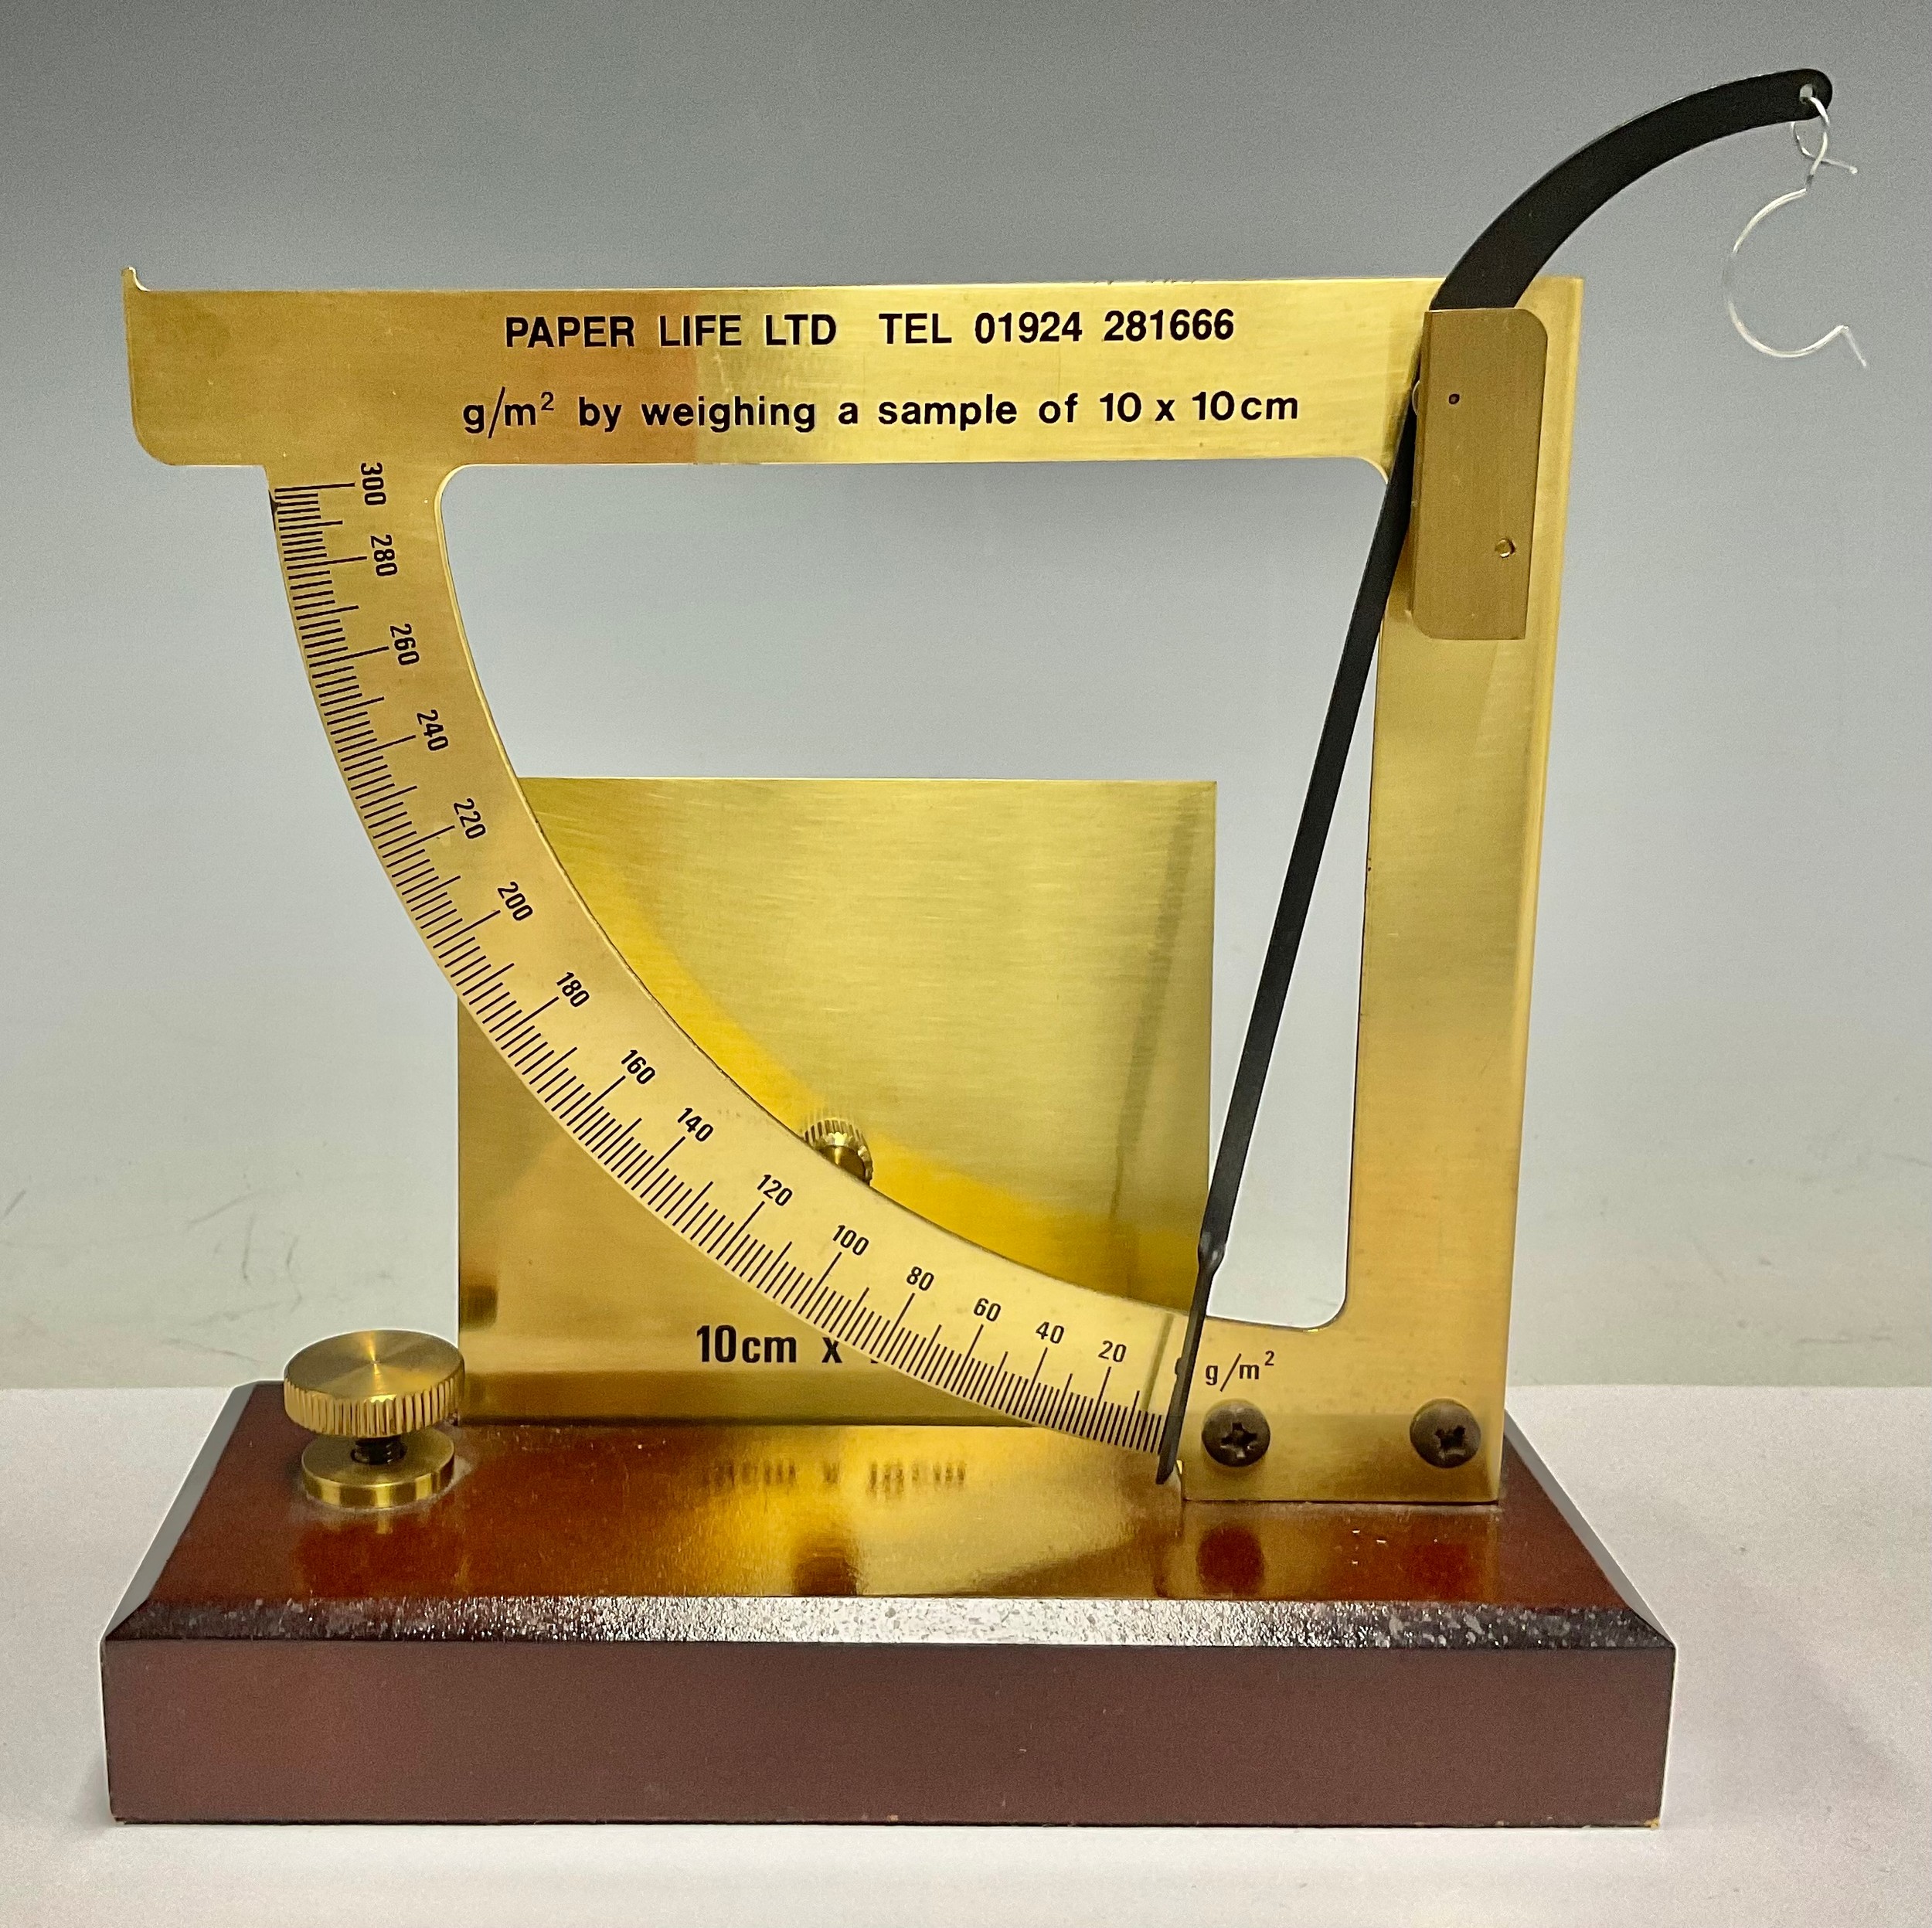 A brass paper scale balance, Paper Life Ltd, g/m2 by weighing a sample of 10 x 10cm, mahogany